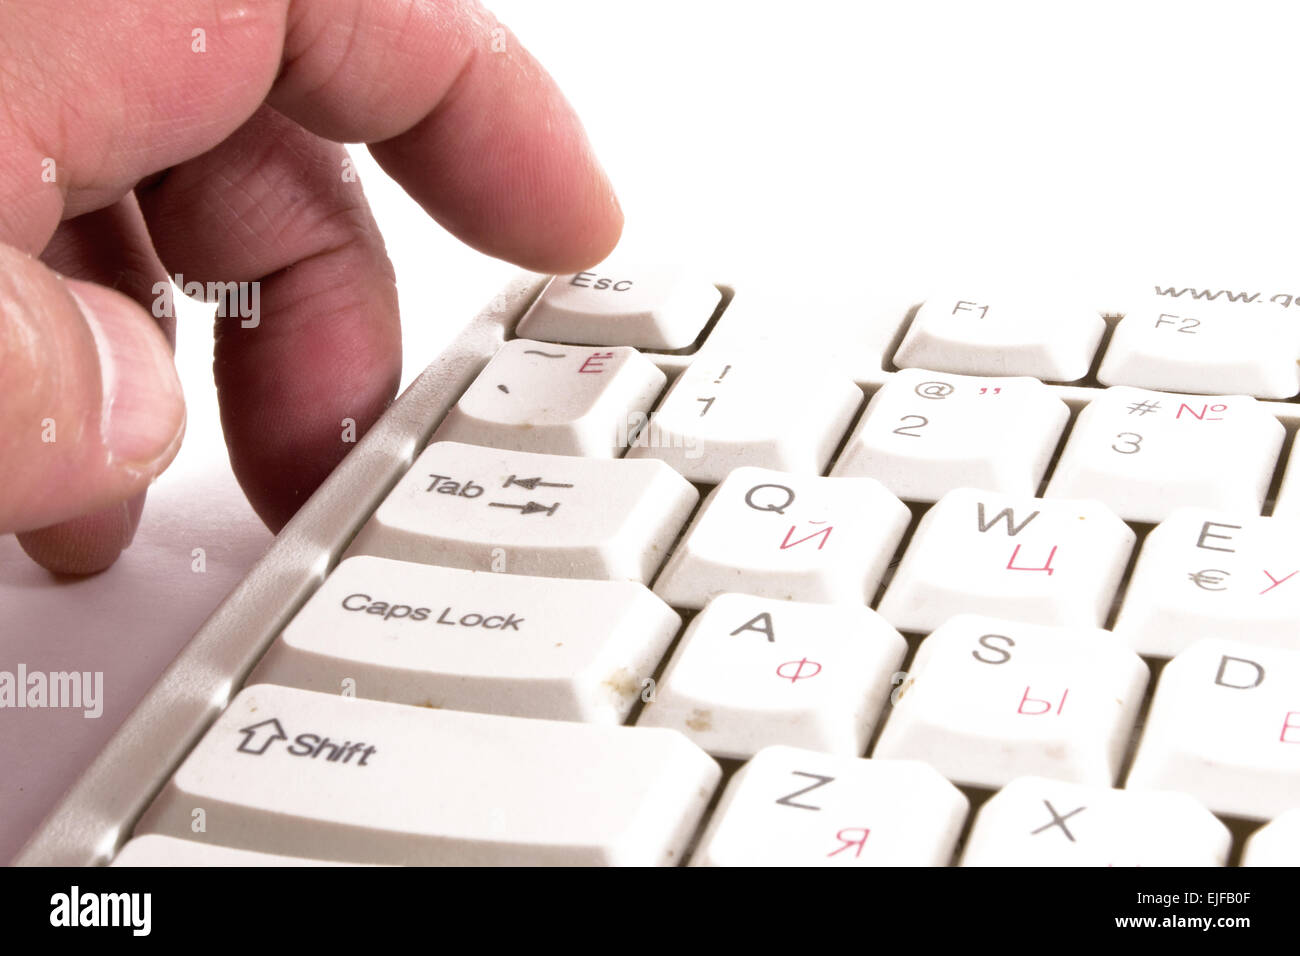 A male finger reaches to touch and press the escape key on a keyboard Stock Photo